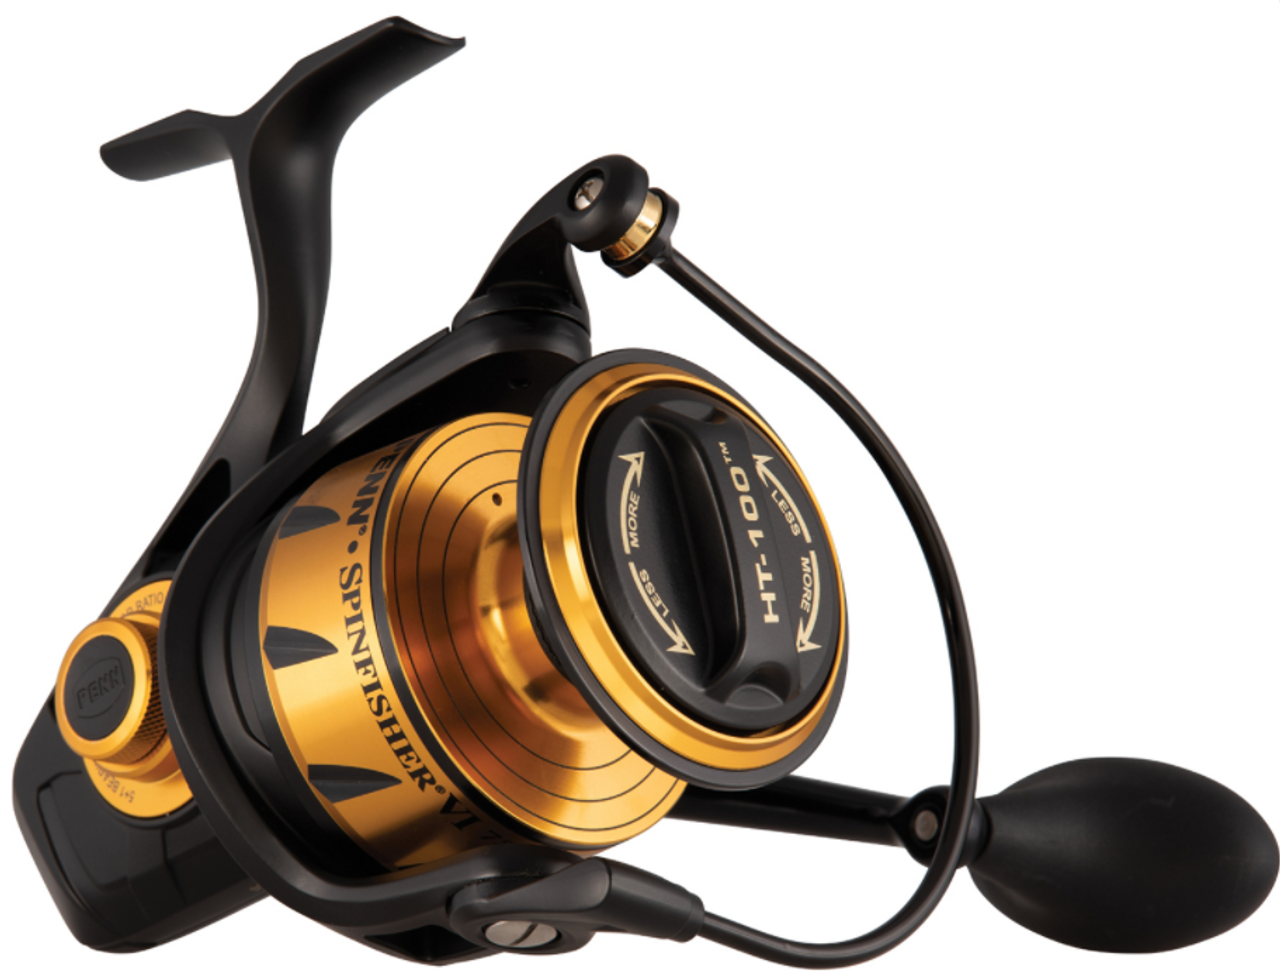 https://cdn11.bigcommerce.com/s-s7ib93jl4n/images/stencil/1280x1280/products/37649/56984/SSVI6500-penn-spinfisher-VI-spinning-reel-black-gold-a__37908.1647883807.png?c=2?imbypass=on